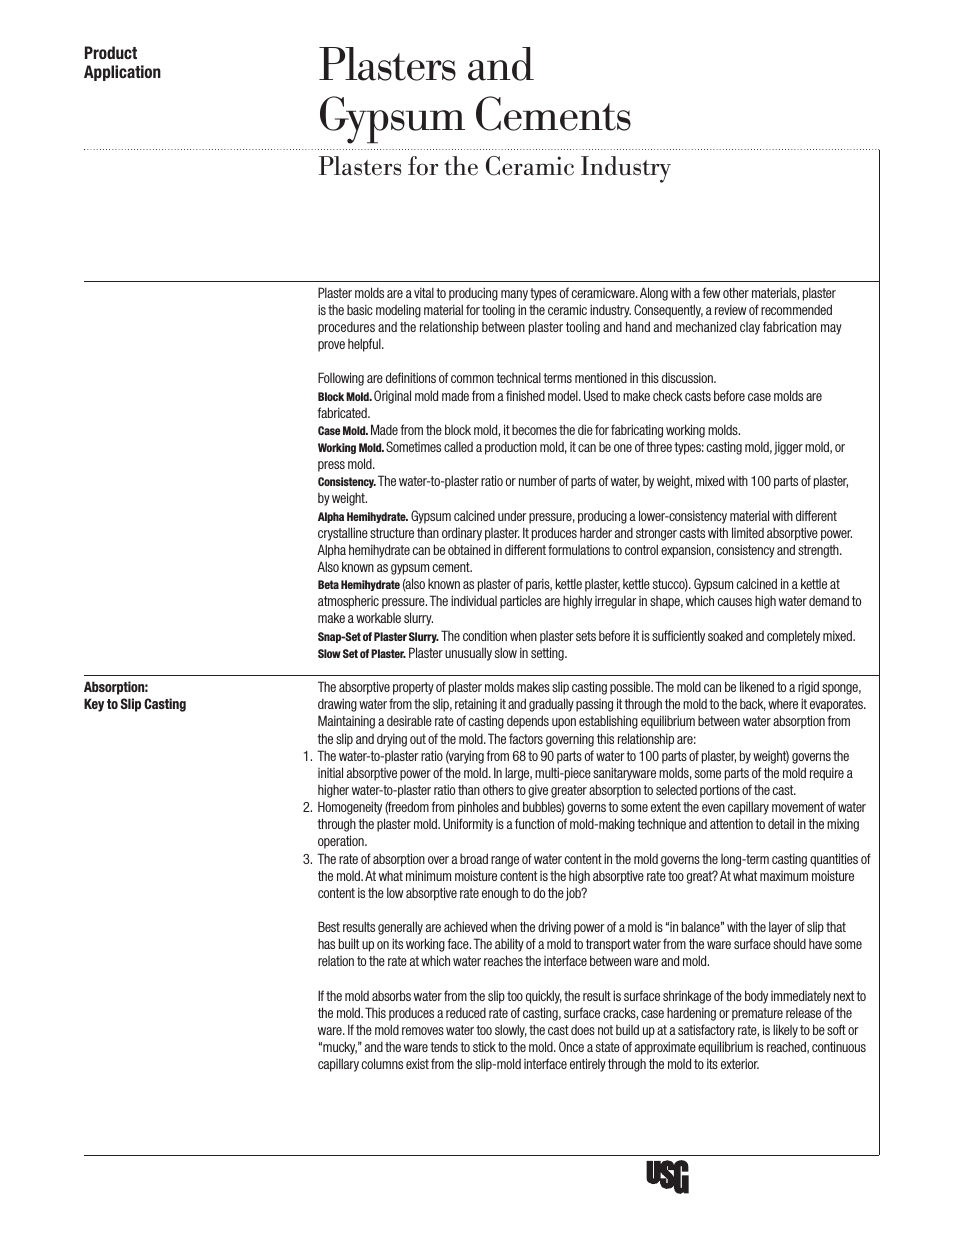 Plasters and Gypsum Cements for the Ceramic Industry